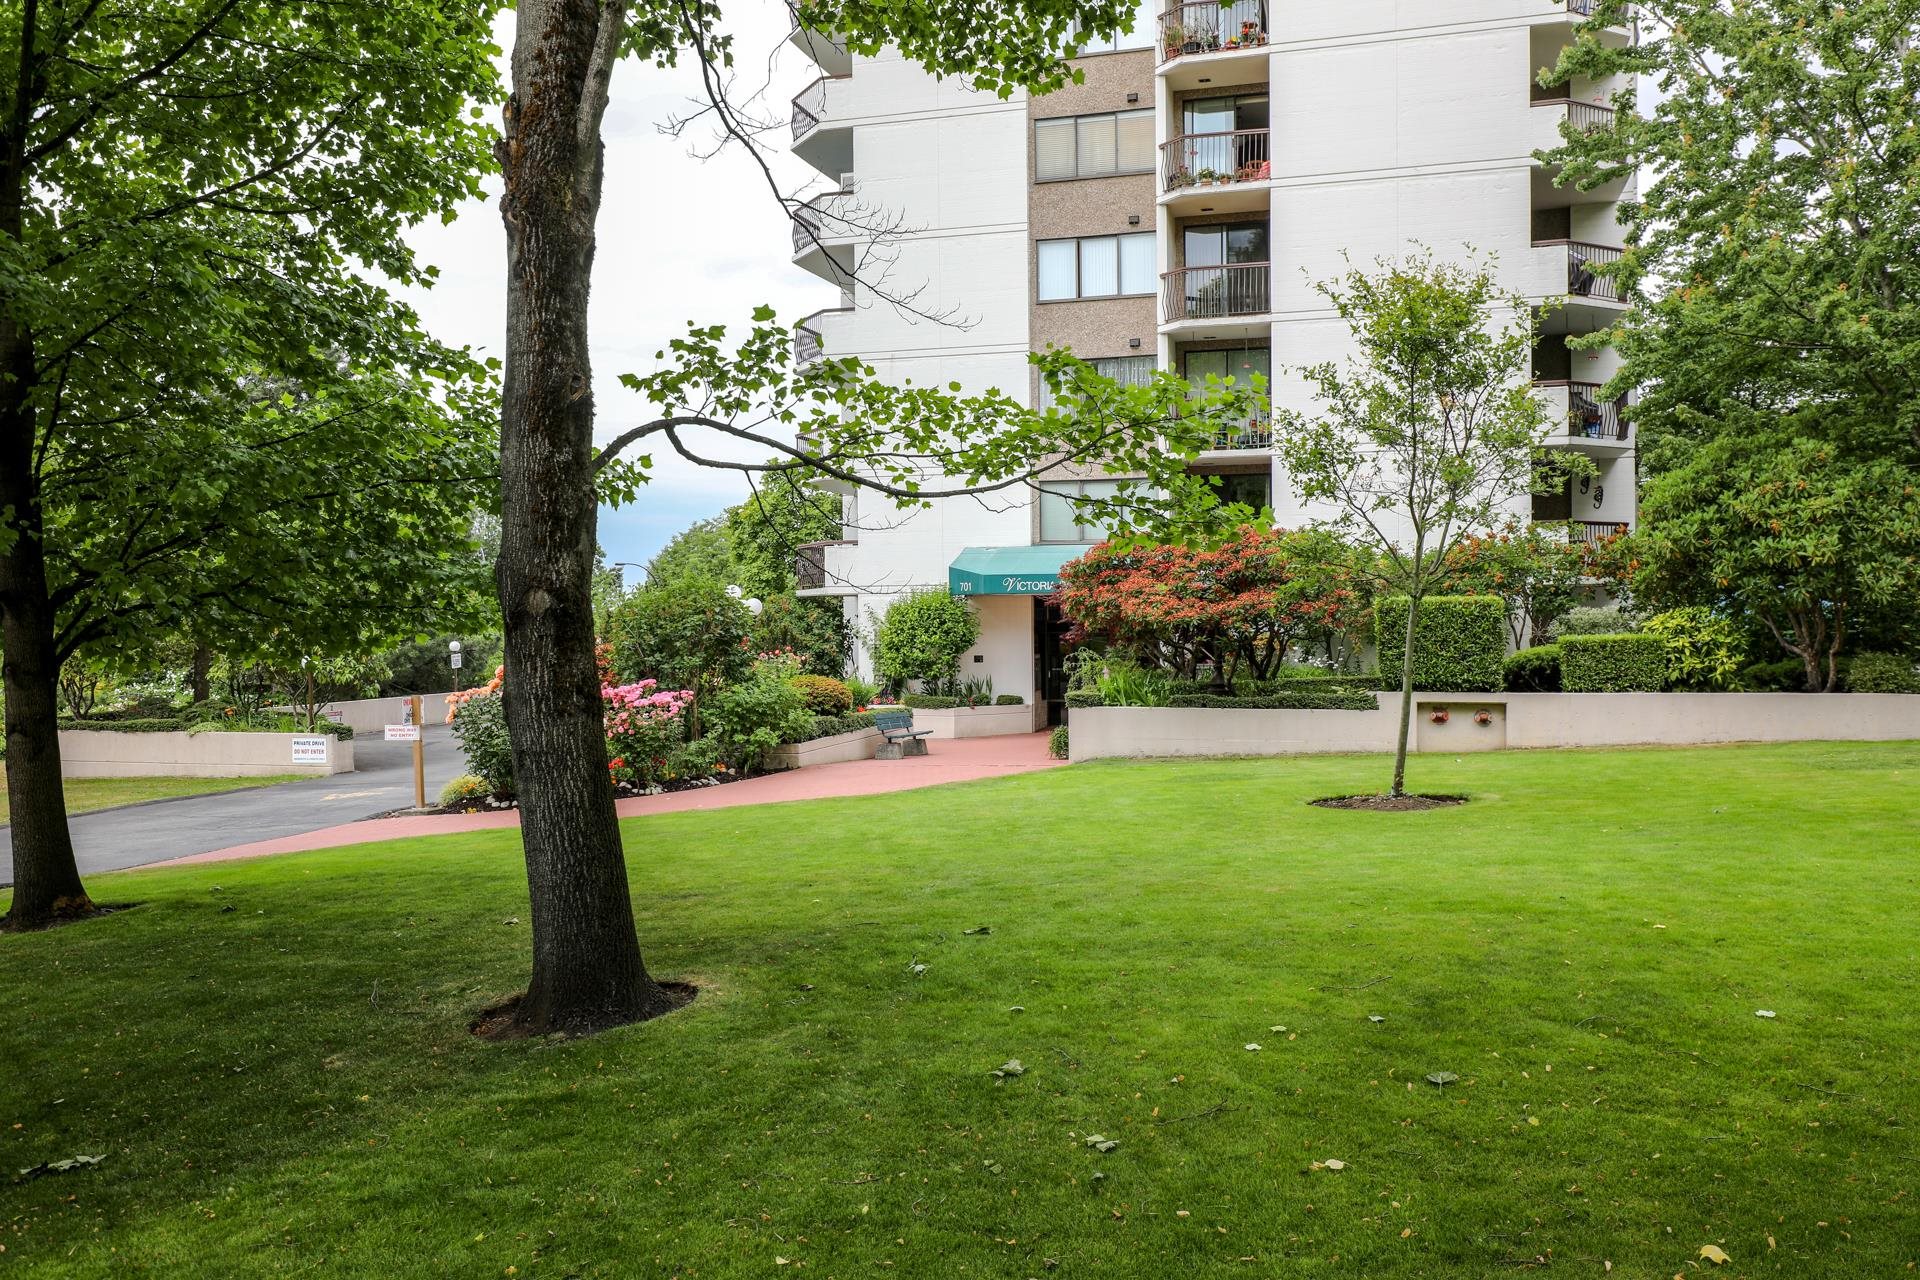 Listing image of 302 701 W VICTORIA PARK